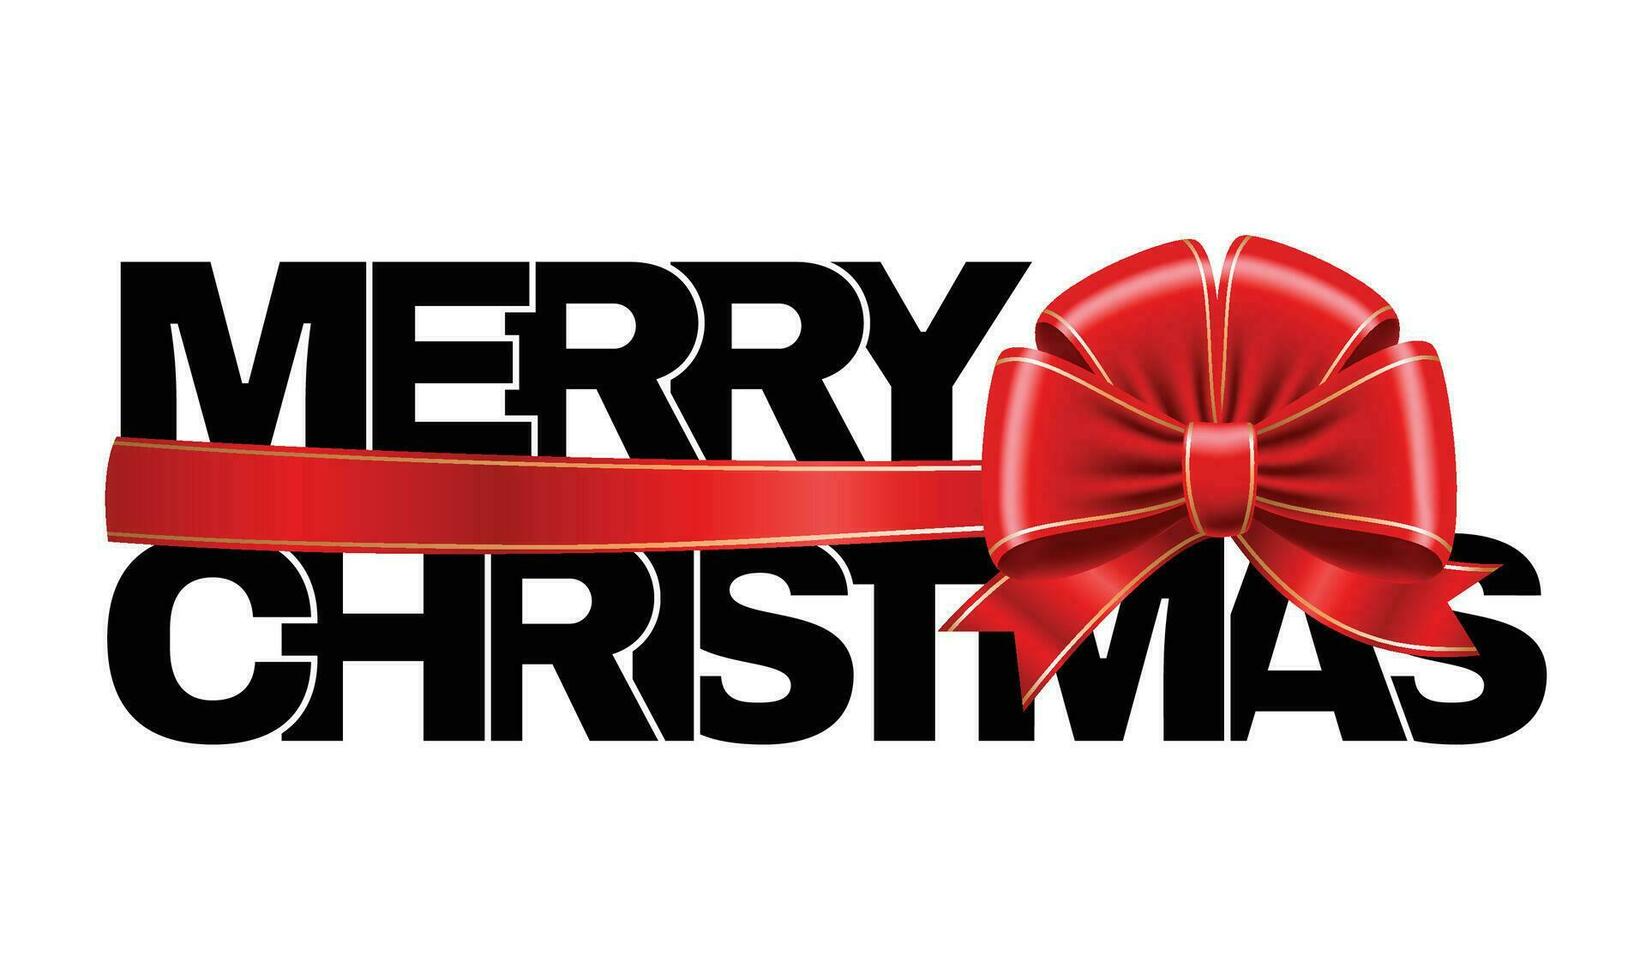 Merry Christmas logo with a red bow. Vector 3d illustration.